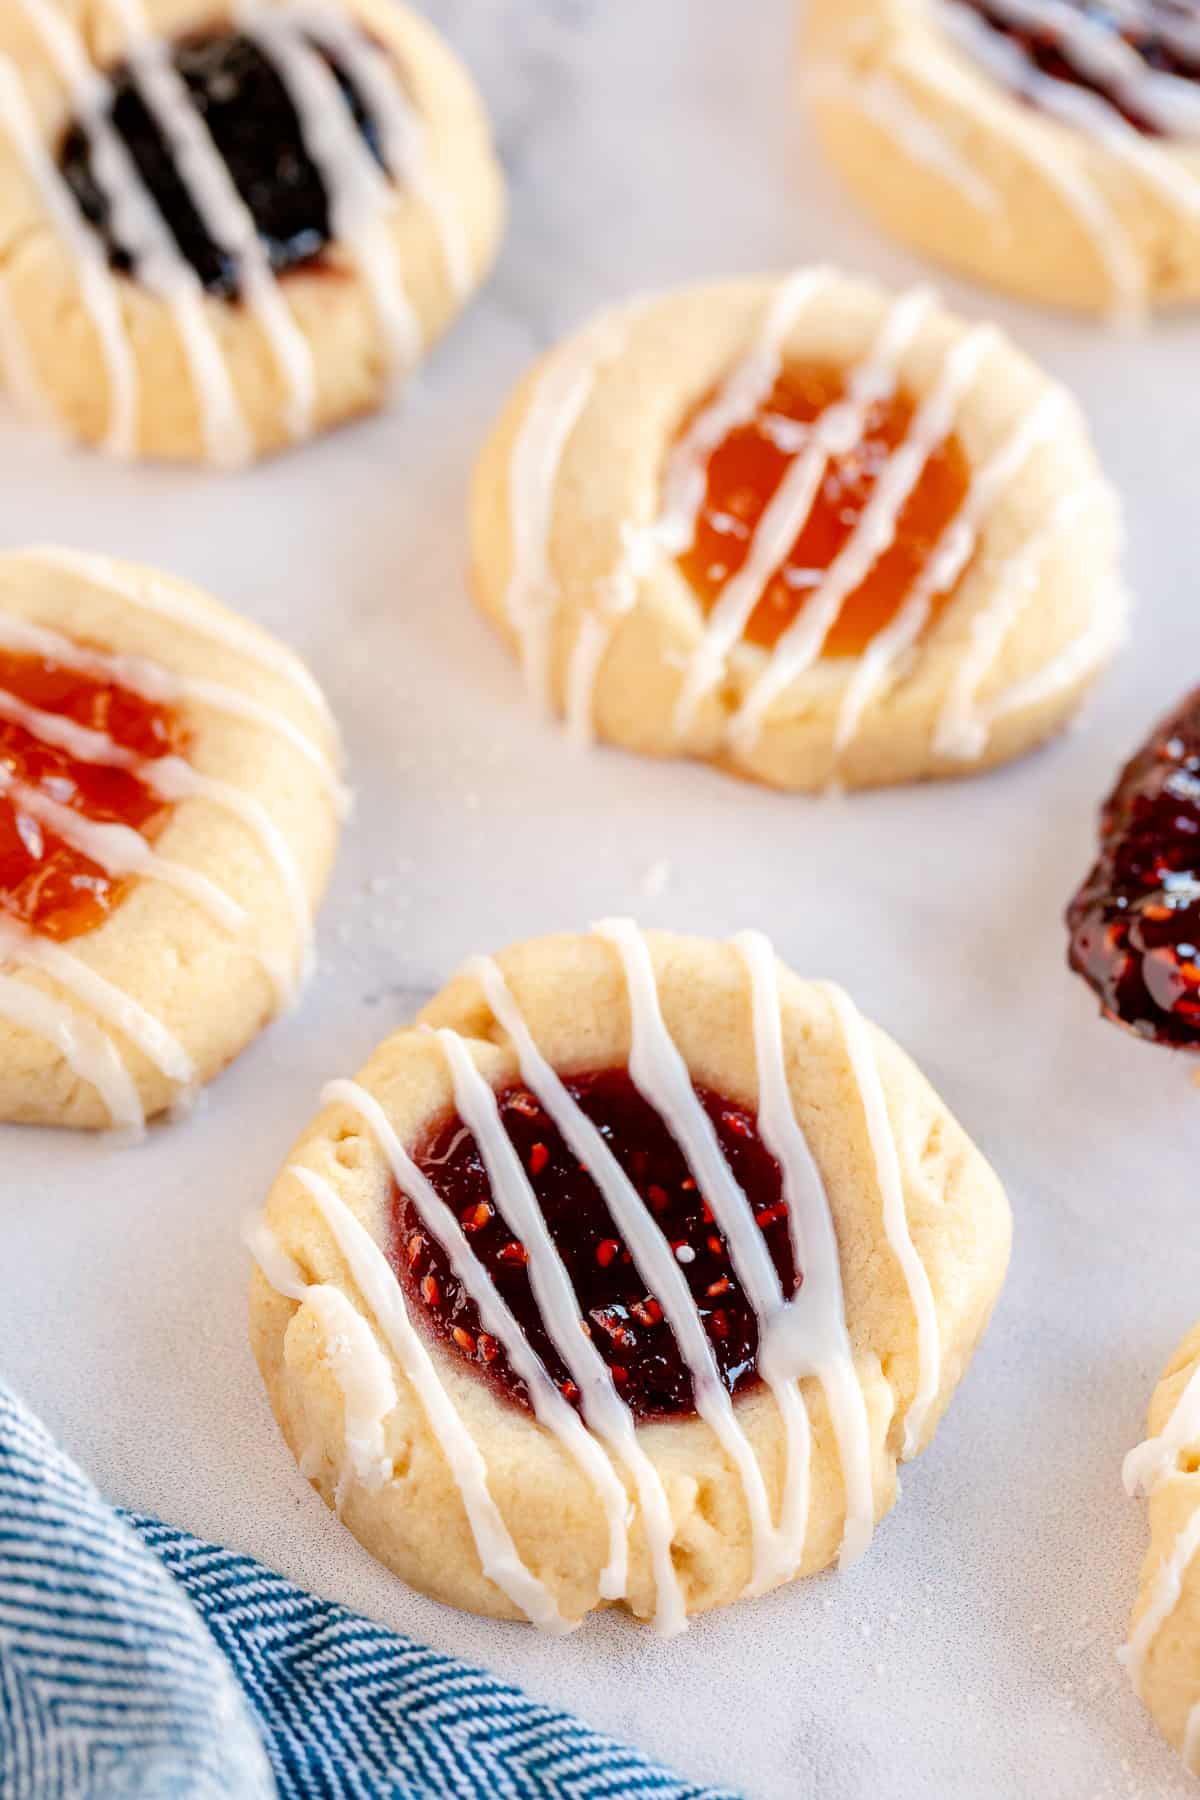 Jam Thumbprint Cookies topped with glaze.